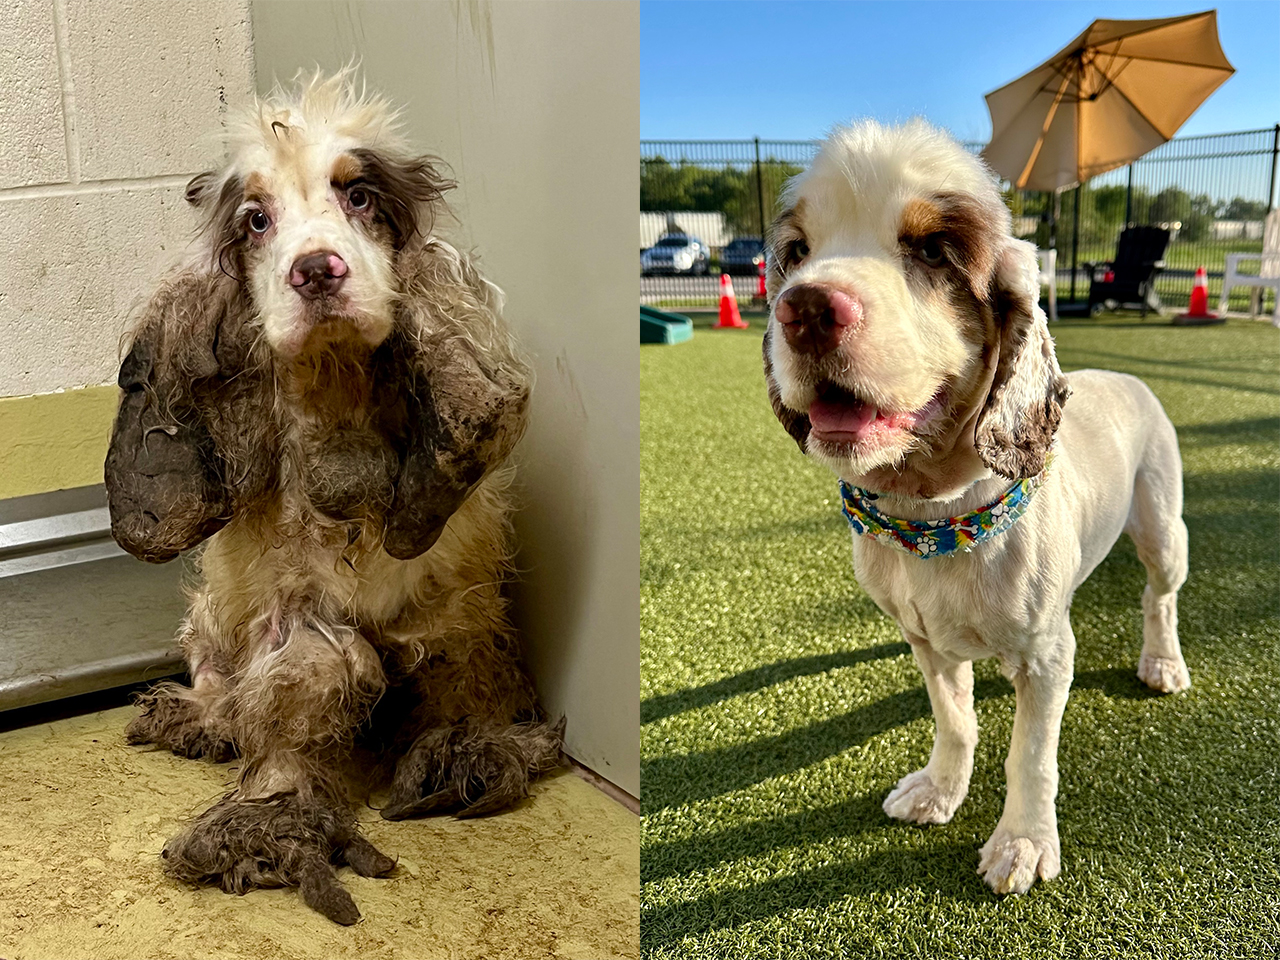 Cookie arrived at the shelter in Wichita, KS, as a stray with severe mats on his ears, legs and chest. With the help of an expert dog groomer, they removed around two pounds of fur, revealing his true beauty. He's now thriving in his new home and living his best life.